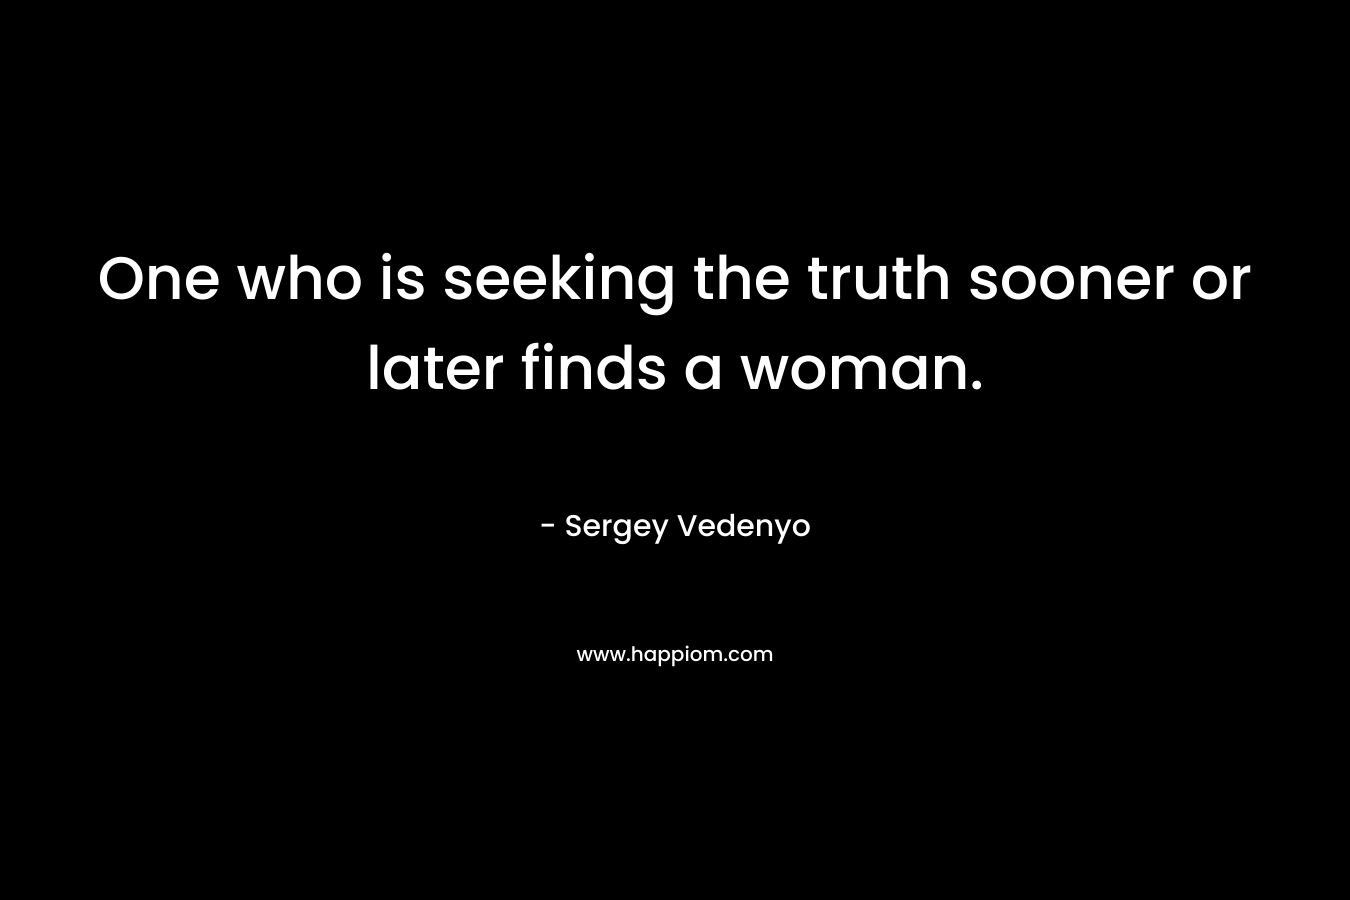 One who is seeking the truth sooner or later finds a woman. – Sergey Vedenyo